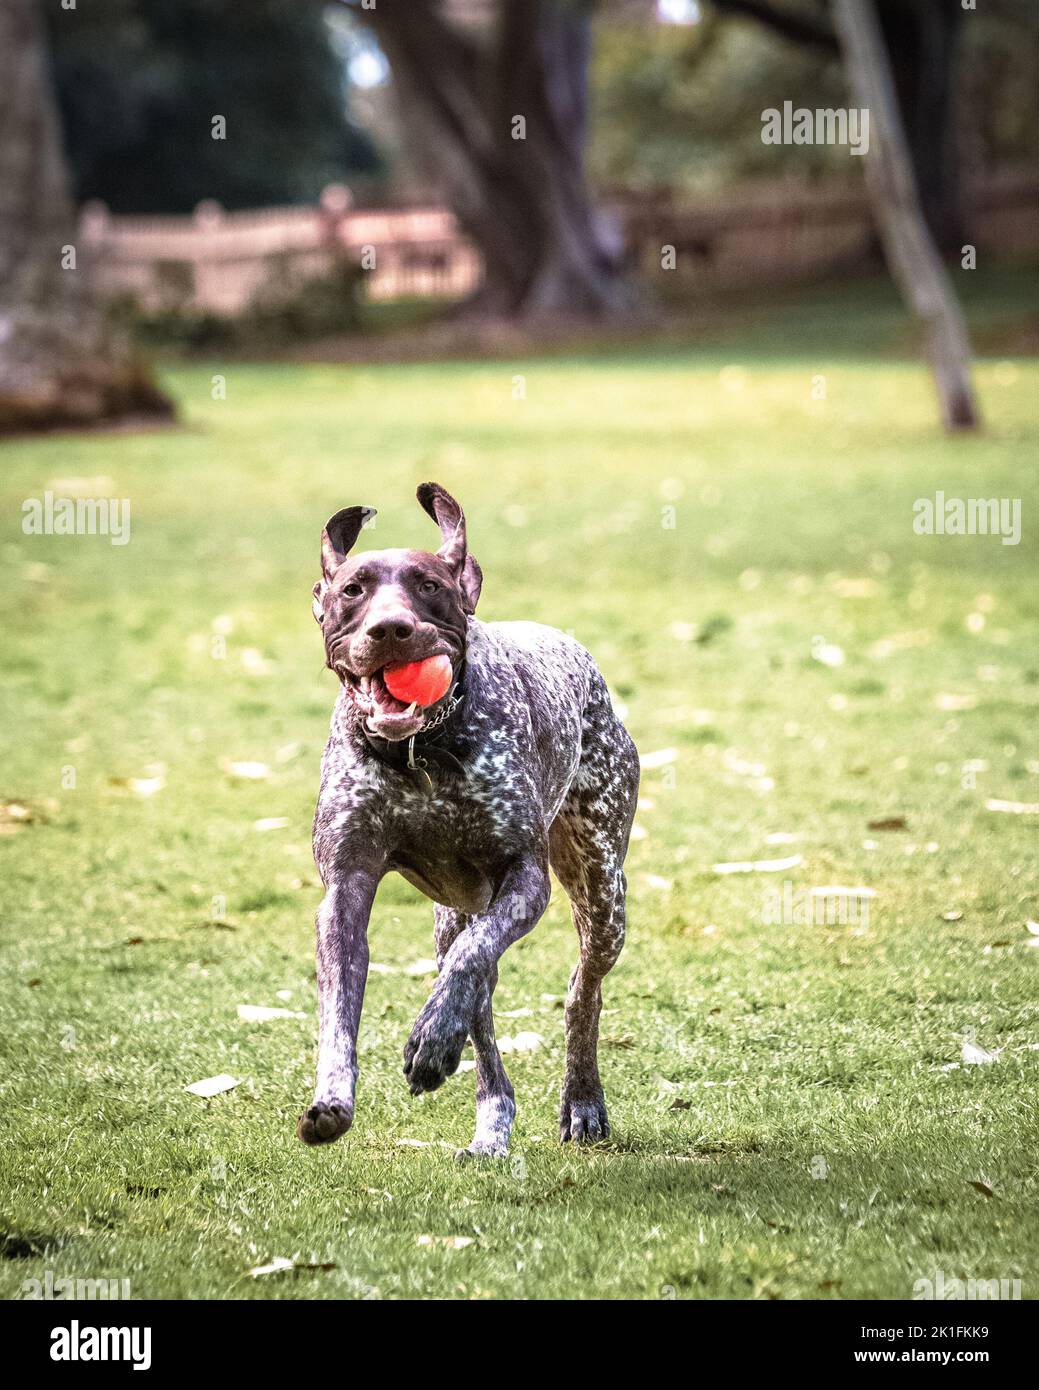 A dog carrying a ball while running Stock Photo